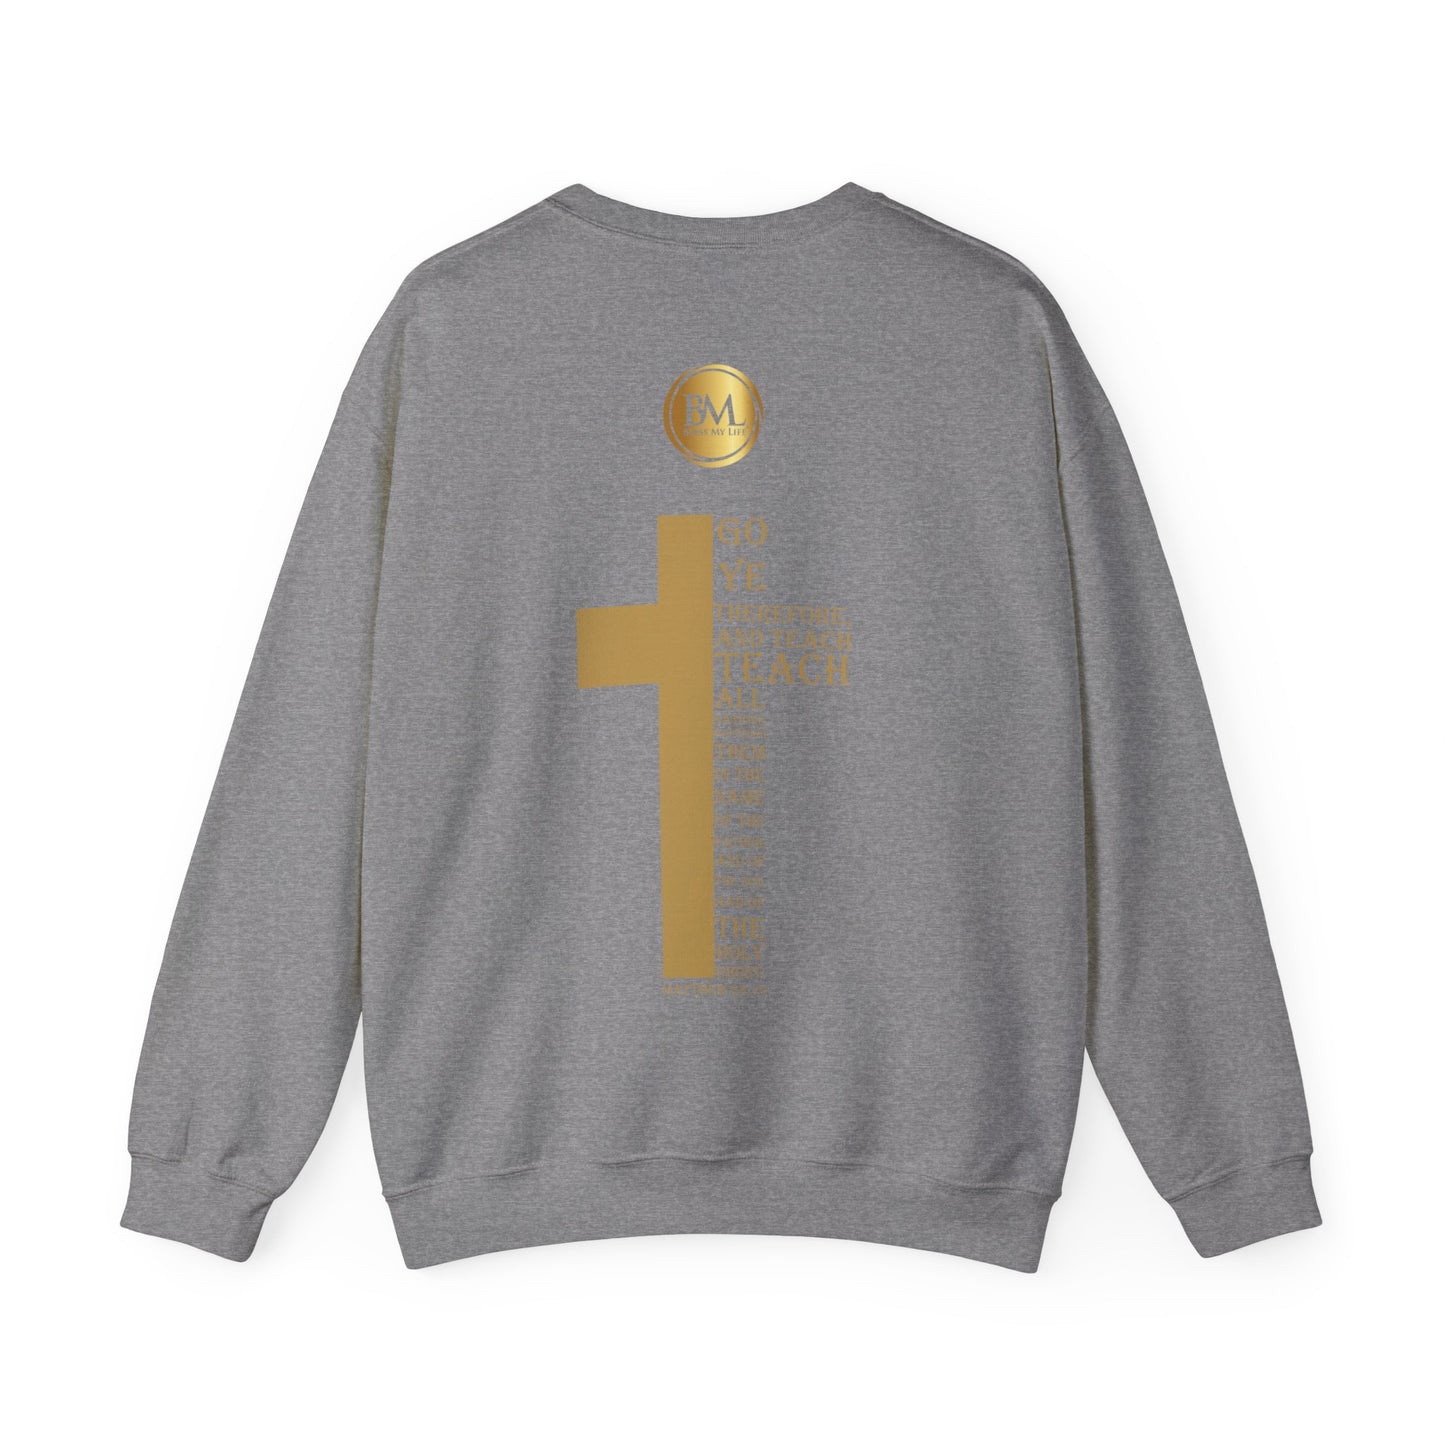 Go ye therefore, and teach all nations, baptizing them in the name of the Father, and of the Son, and of the Holy Ghost, Bless My Life ® Matthew 28:19 Crewneck Sweatshirt